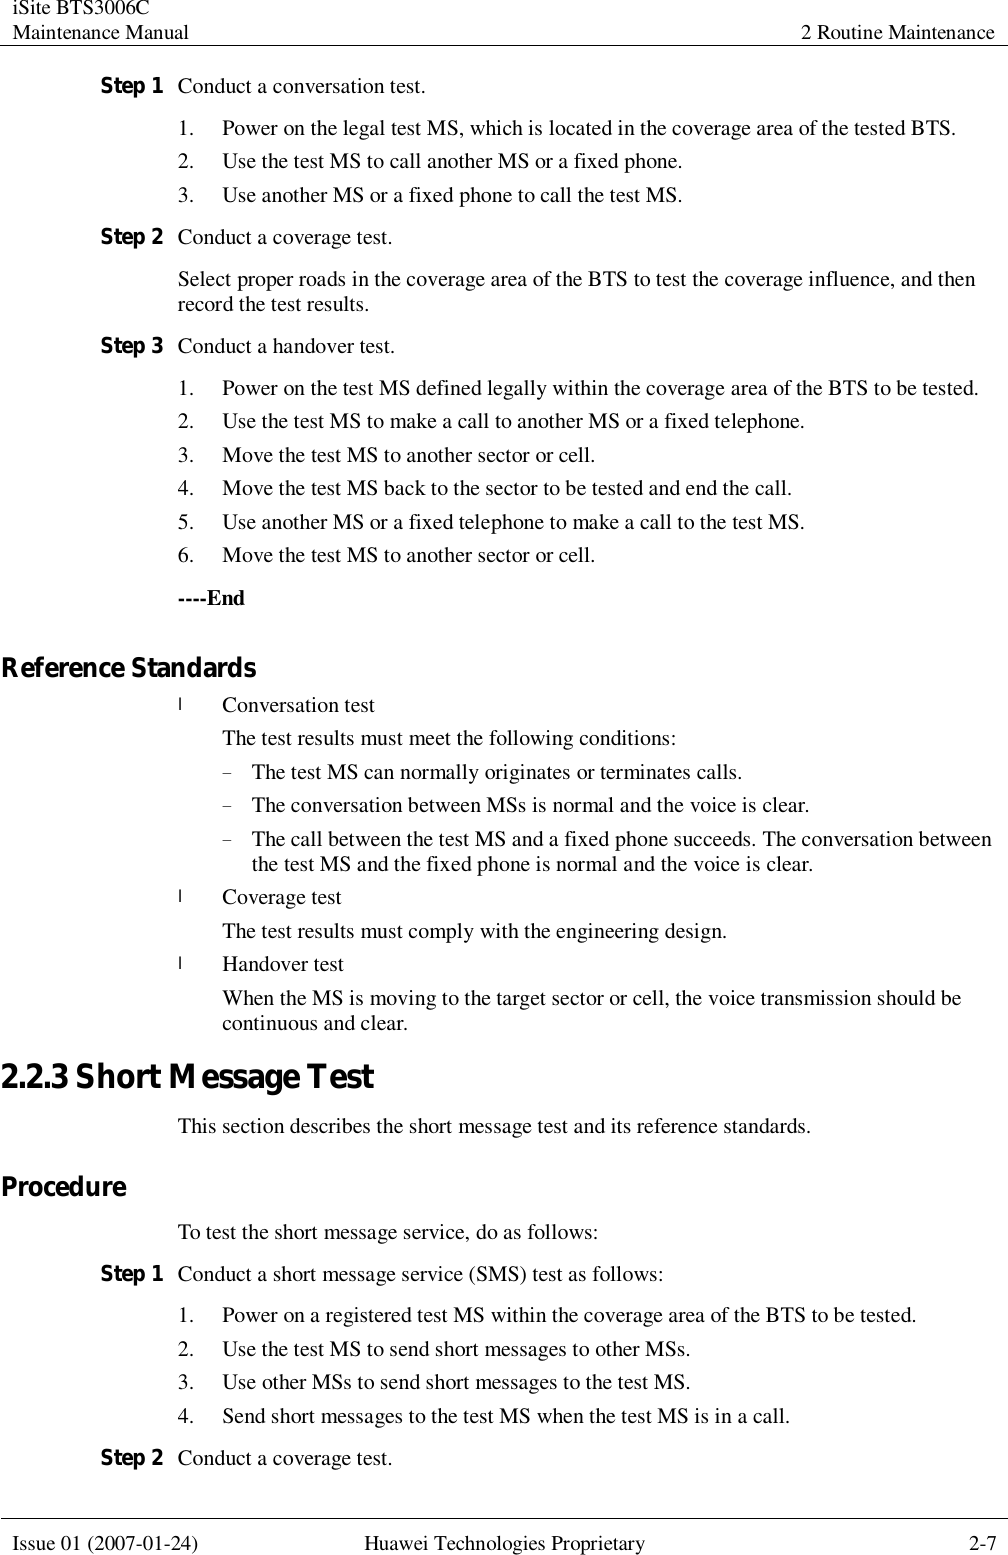 iSite BTS3006C Maintenance Manual 2 Routine Maintenance  Issue 01 (2007-01-24) Huawei Technologies Proprietary 2-7  Step 1 Conduct a conversation test. 1. Power on the legal test MS, which is located in the coverage area of the tested BTS. 2. Use the test MS to call another MS or a fixed phone. 3. Use another MS or a fixed phone to call the test MS. Step 2 Conduct a coverage test. Select proper roads in the coverage area of the BTS to test the coverage influence, and then record the test results. Step 3 Conduct a handover test. 1. Power on the test MS defined legally within the coverage area of the BTS to be tested. 2. Use the test MS to make a call to another MS or a fixed telephone. 3. Move the test MS to another sector or cell.  4. Move the test MS back to the sector to be tested and end the call. 5. Use another MS or a fixed telephone to make a call to the test MS. 6. Move the test MS to another sector or cell. ----End Reference Standards l Conversation test The test results must meet the following conditions: − The test MS can normally originates or terminates calls.  − The conversation between MSs is normal and the voice is clear. − The call between the test MS and a fixed phone succeeds. The conversation between the test MS and the fixed phone is normal and the voice is clear. l Coverage test The test results must comply with the engineering design. l Handover test When the MS is moving to the target sector or cell, the voice transmission should be continuous and clear. 2.2.3 Short Message Test This section describes the short message test and its reference standards. Procedure To test the short message service, do as follows: Step 1 Conduct a short message service (SMS) test as follows: 1. Power on a registered test MS within the coverage area of the BTS to be tested. 2. Use the test MS to send short messages to other MSs. 3. Use other MSs to send short messages to the test MS. 4. Send short messages to the test MS when the test MS is in a call. Step 2 Conduct a coverage test. 